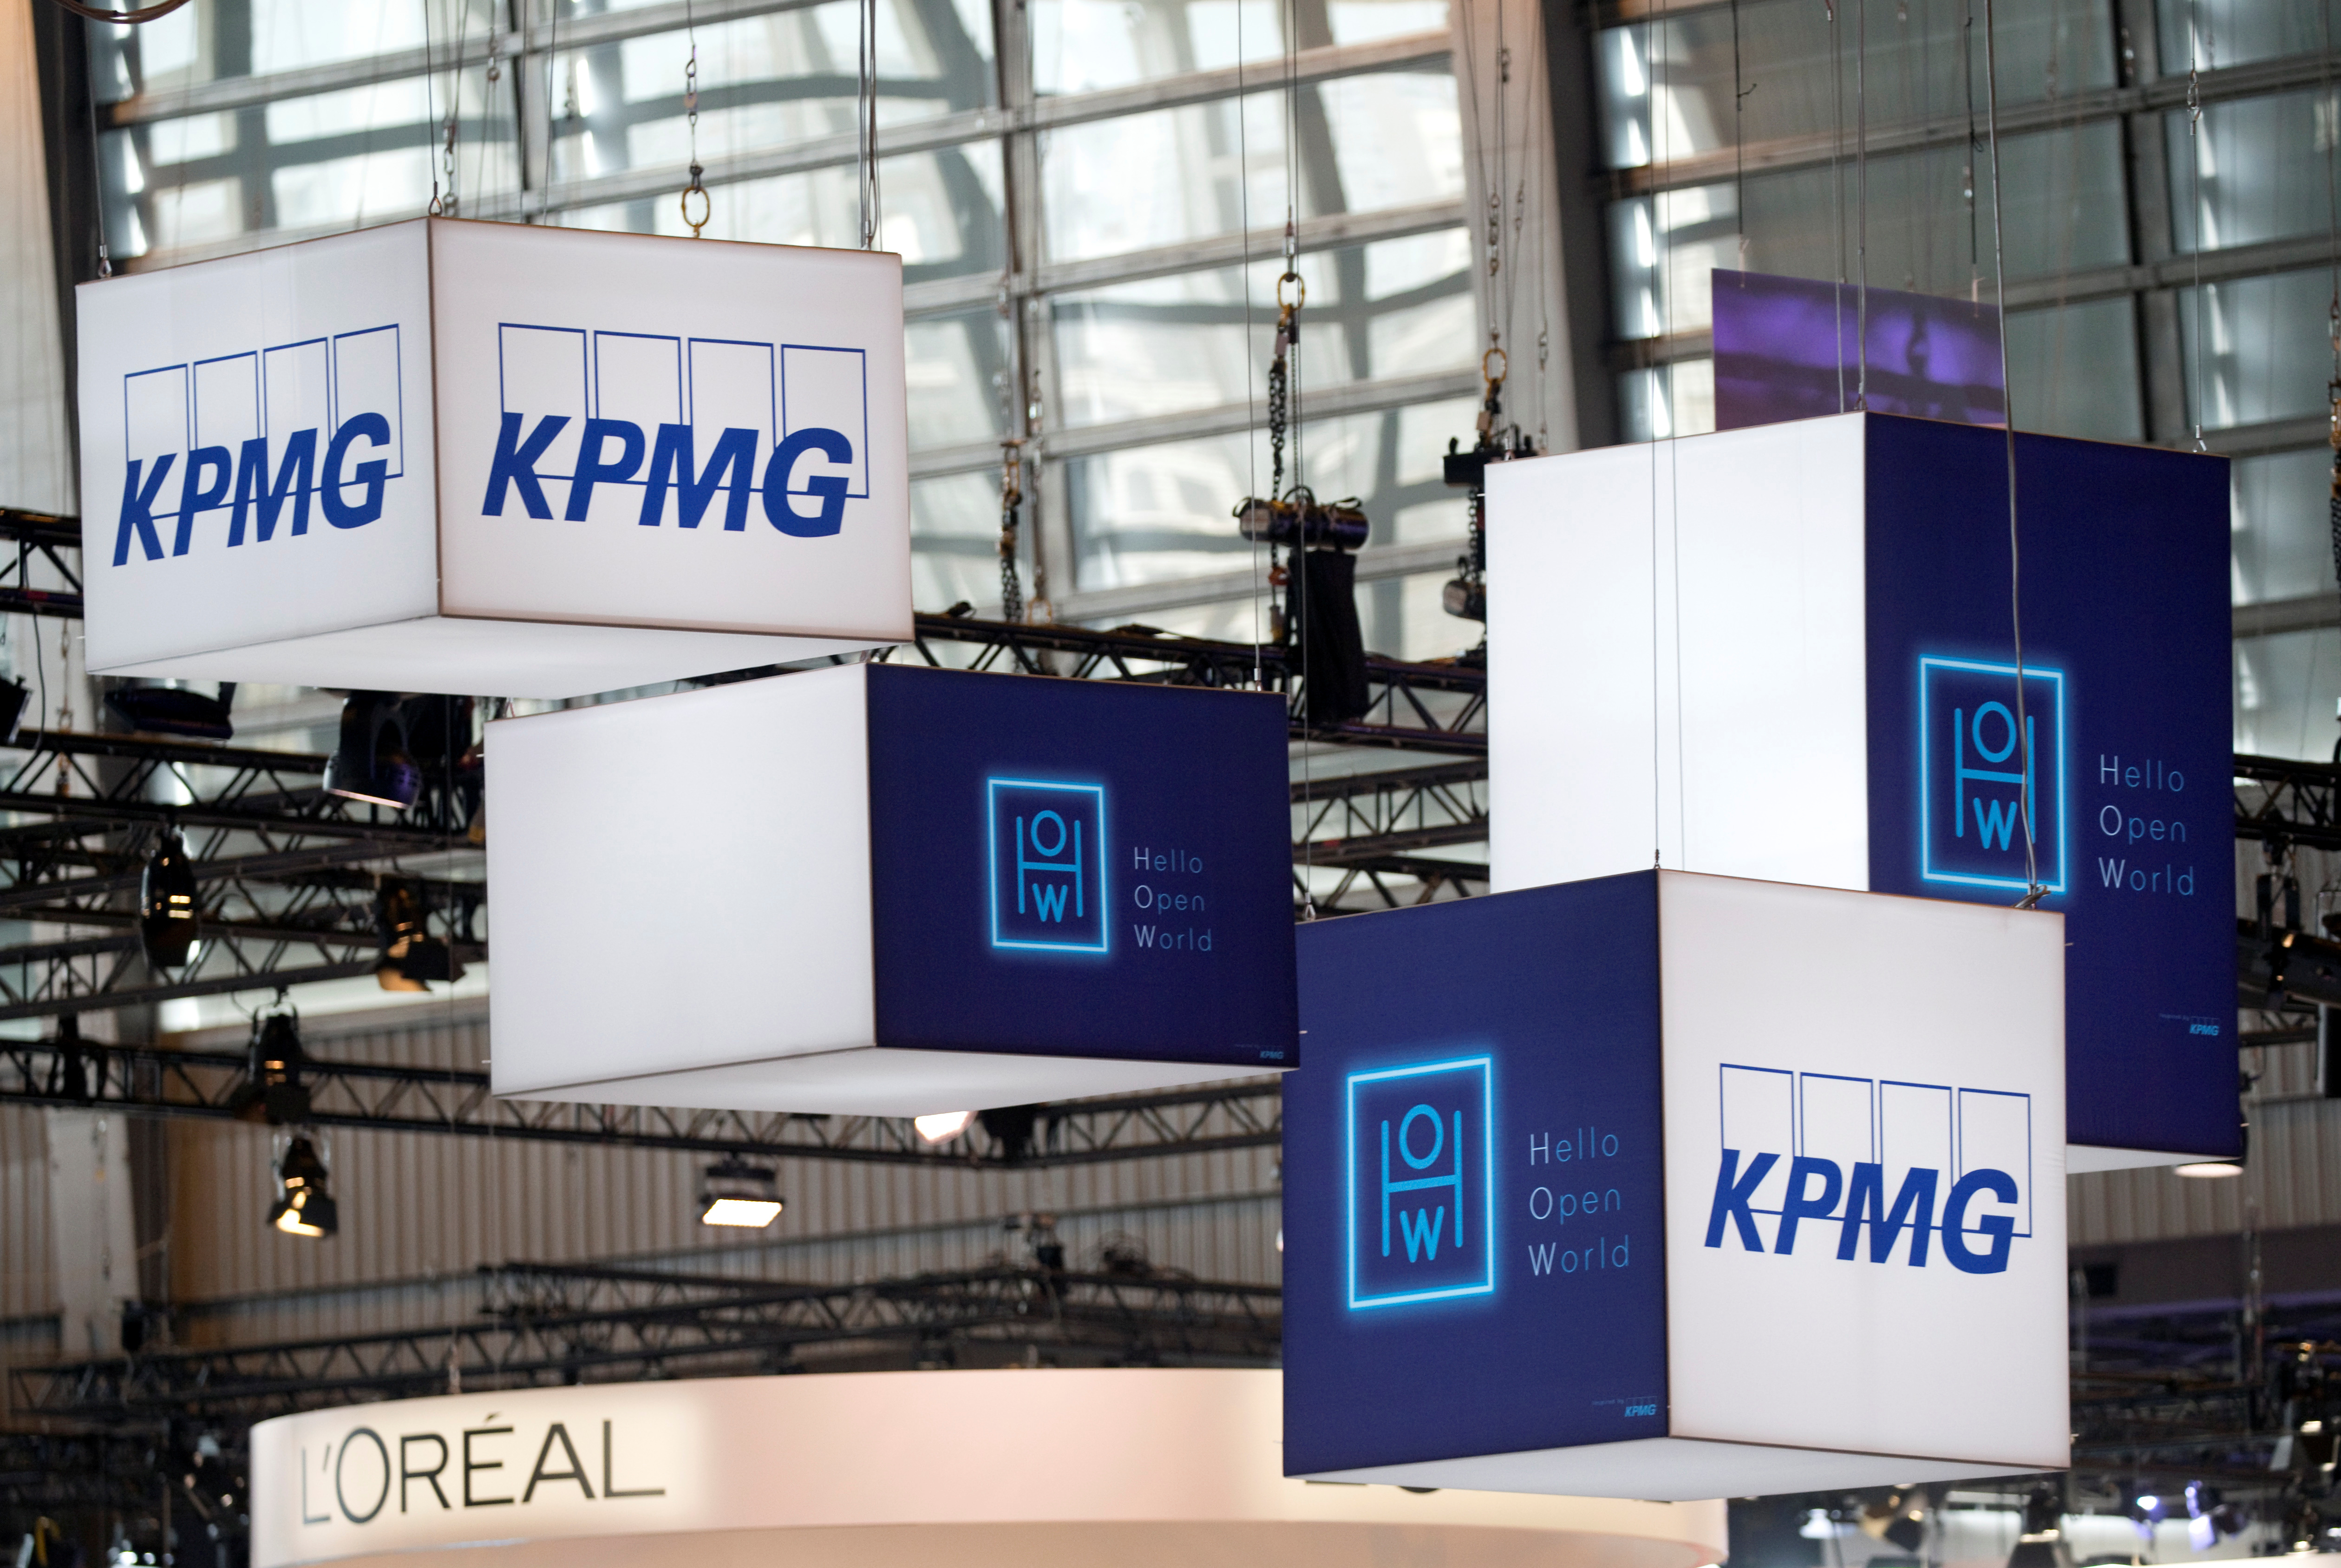 The logo of KPMG, a professional service company is pictured during the Viva Tech start-up and technology summit in Paris